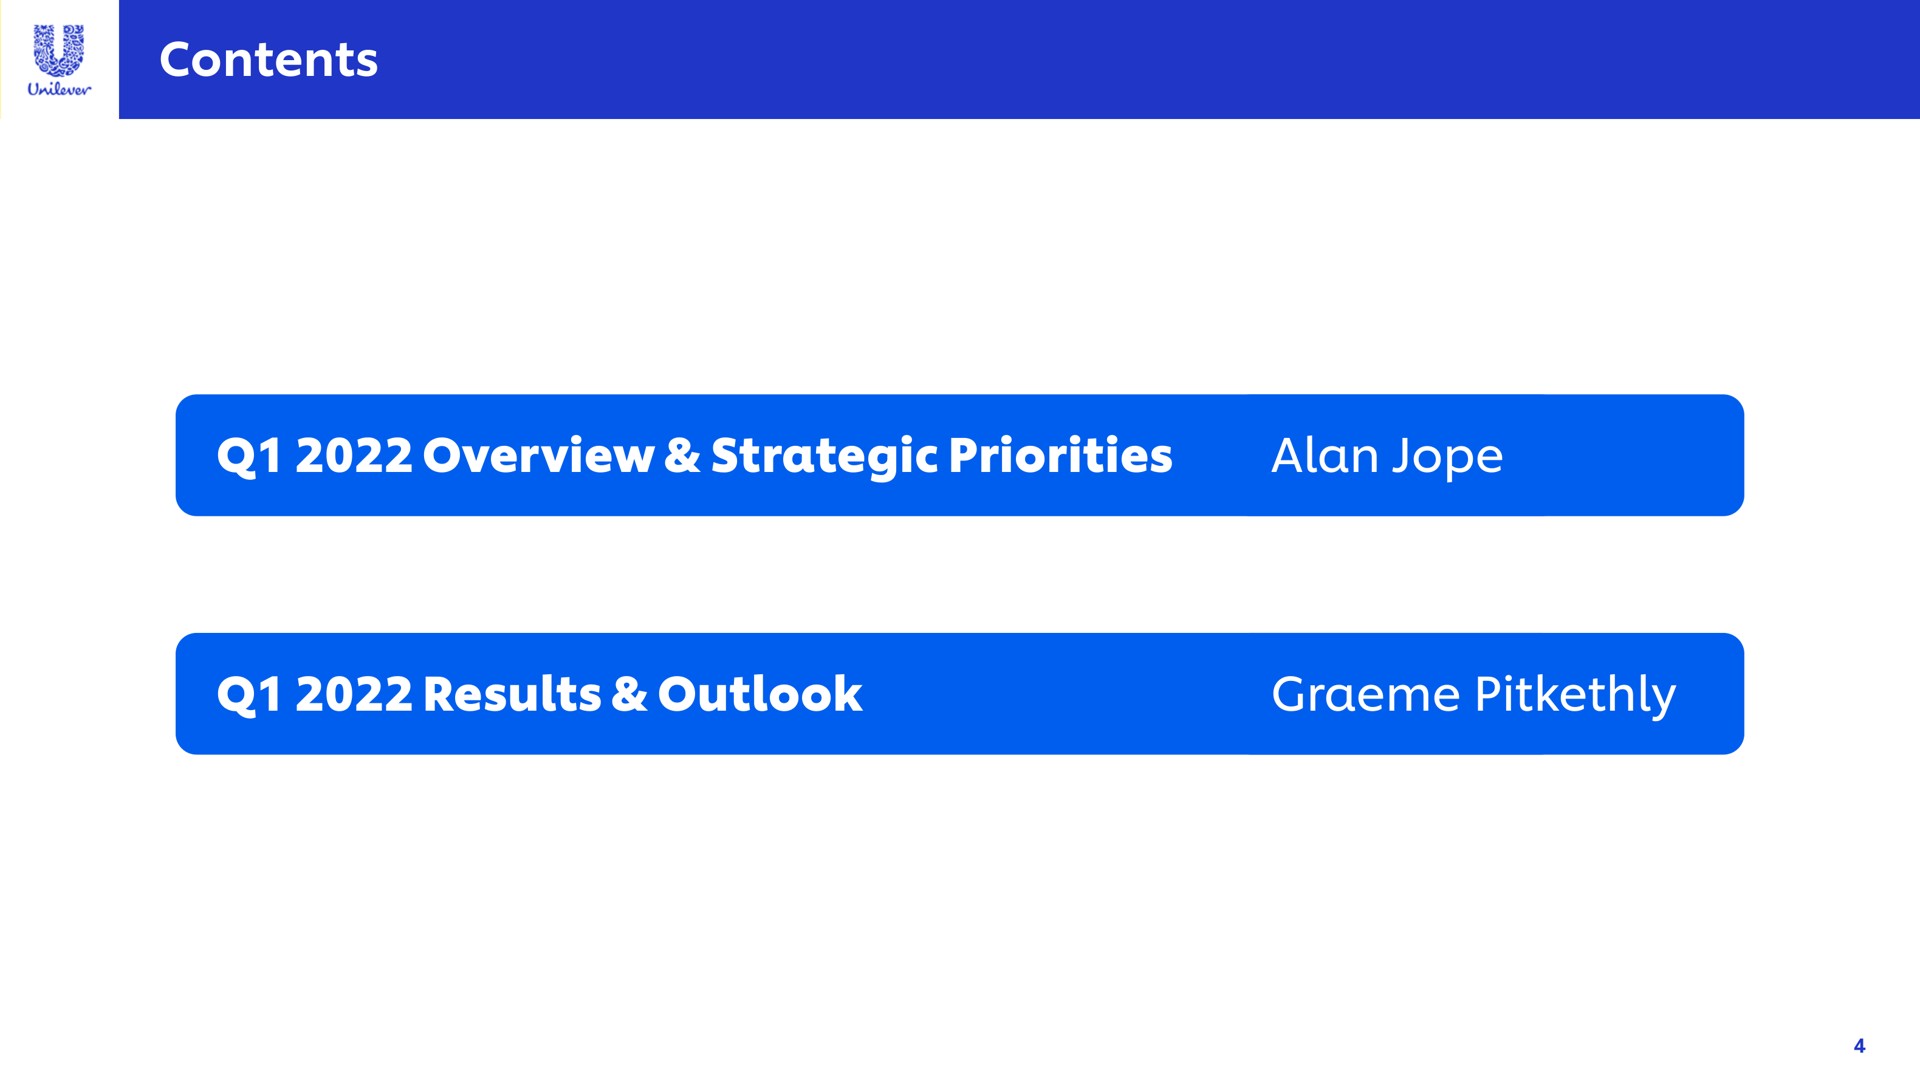 contents overview strategic priorities alan results outlook | Unilever